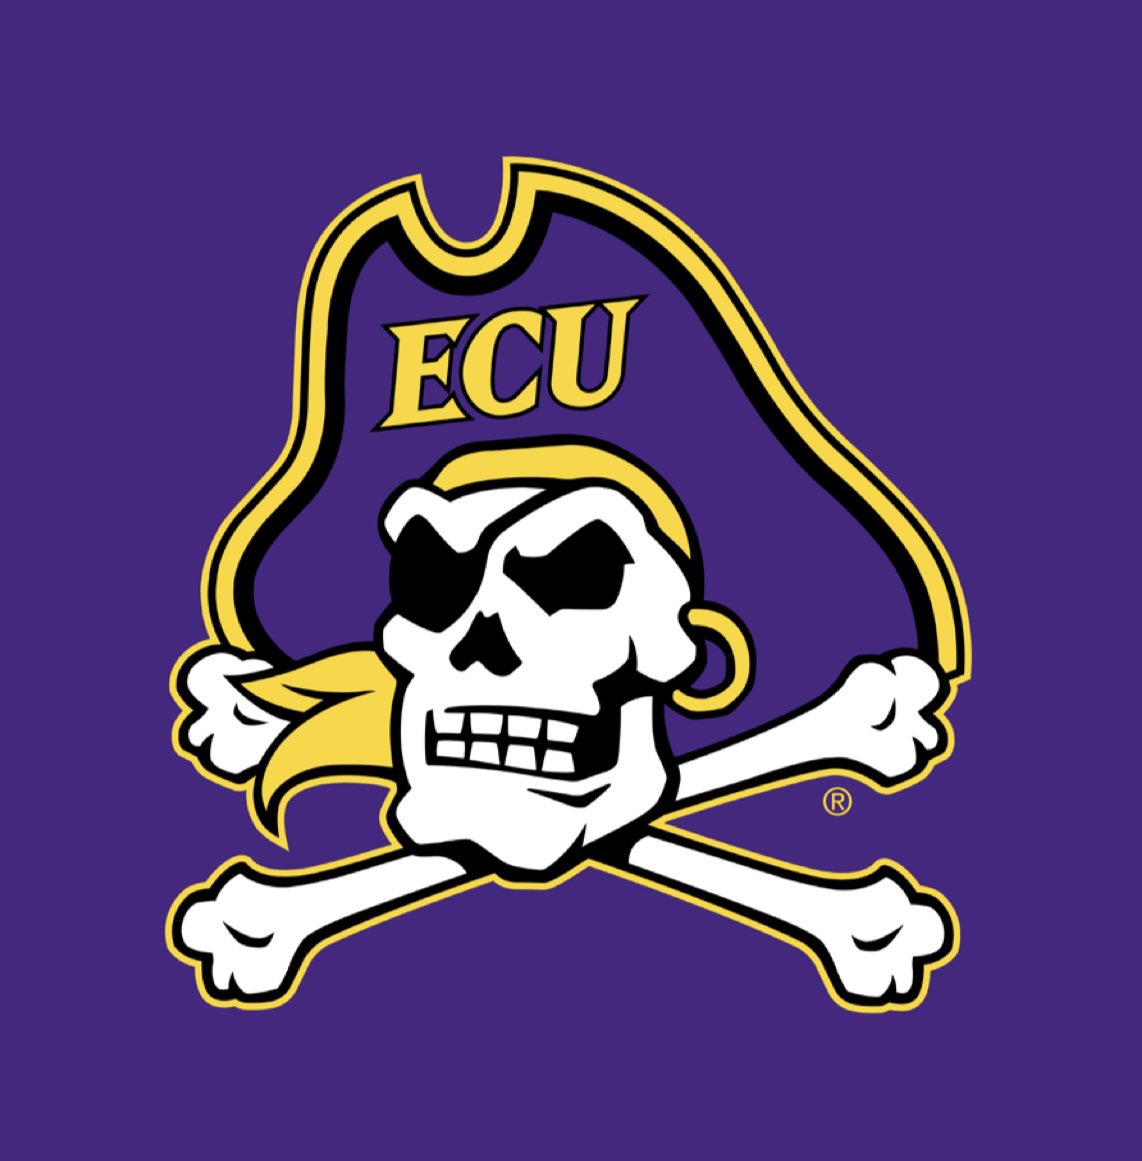 #AGTG After a great phone conversation with @Dyrell_Roberts I am blessed to receive an offer to ECU! 🏴‍☠️ @ECUCoachHouston @ECUPiratesFB @barlow_coach @WGroveFootball1